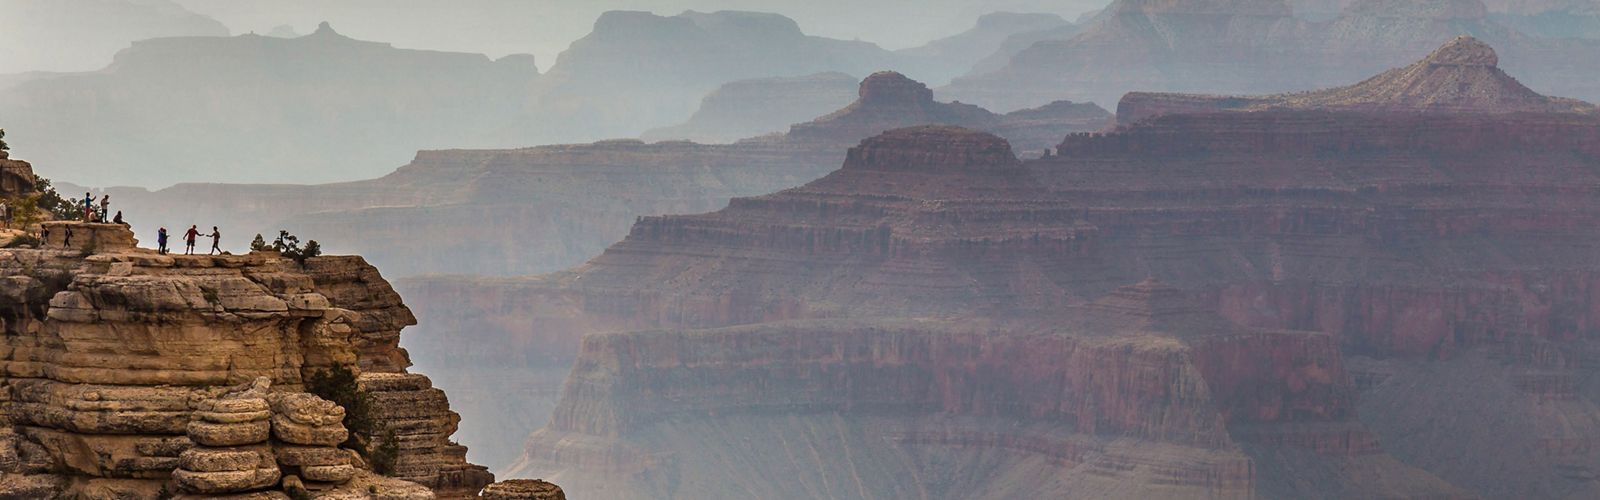 A few people stand atop a rock formation overlooking the Grand Canyon.